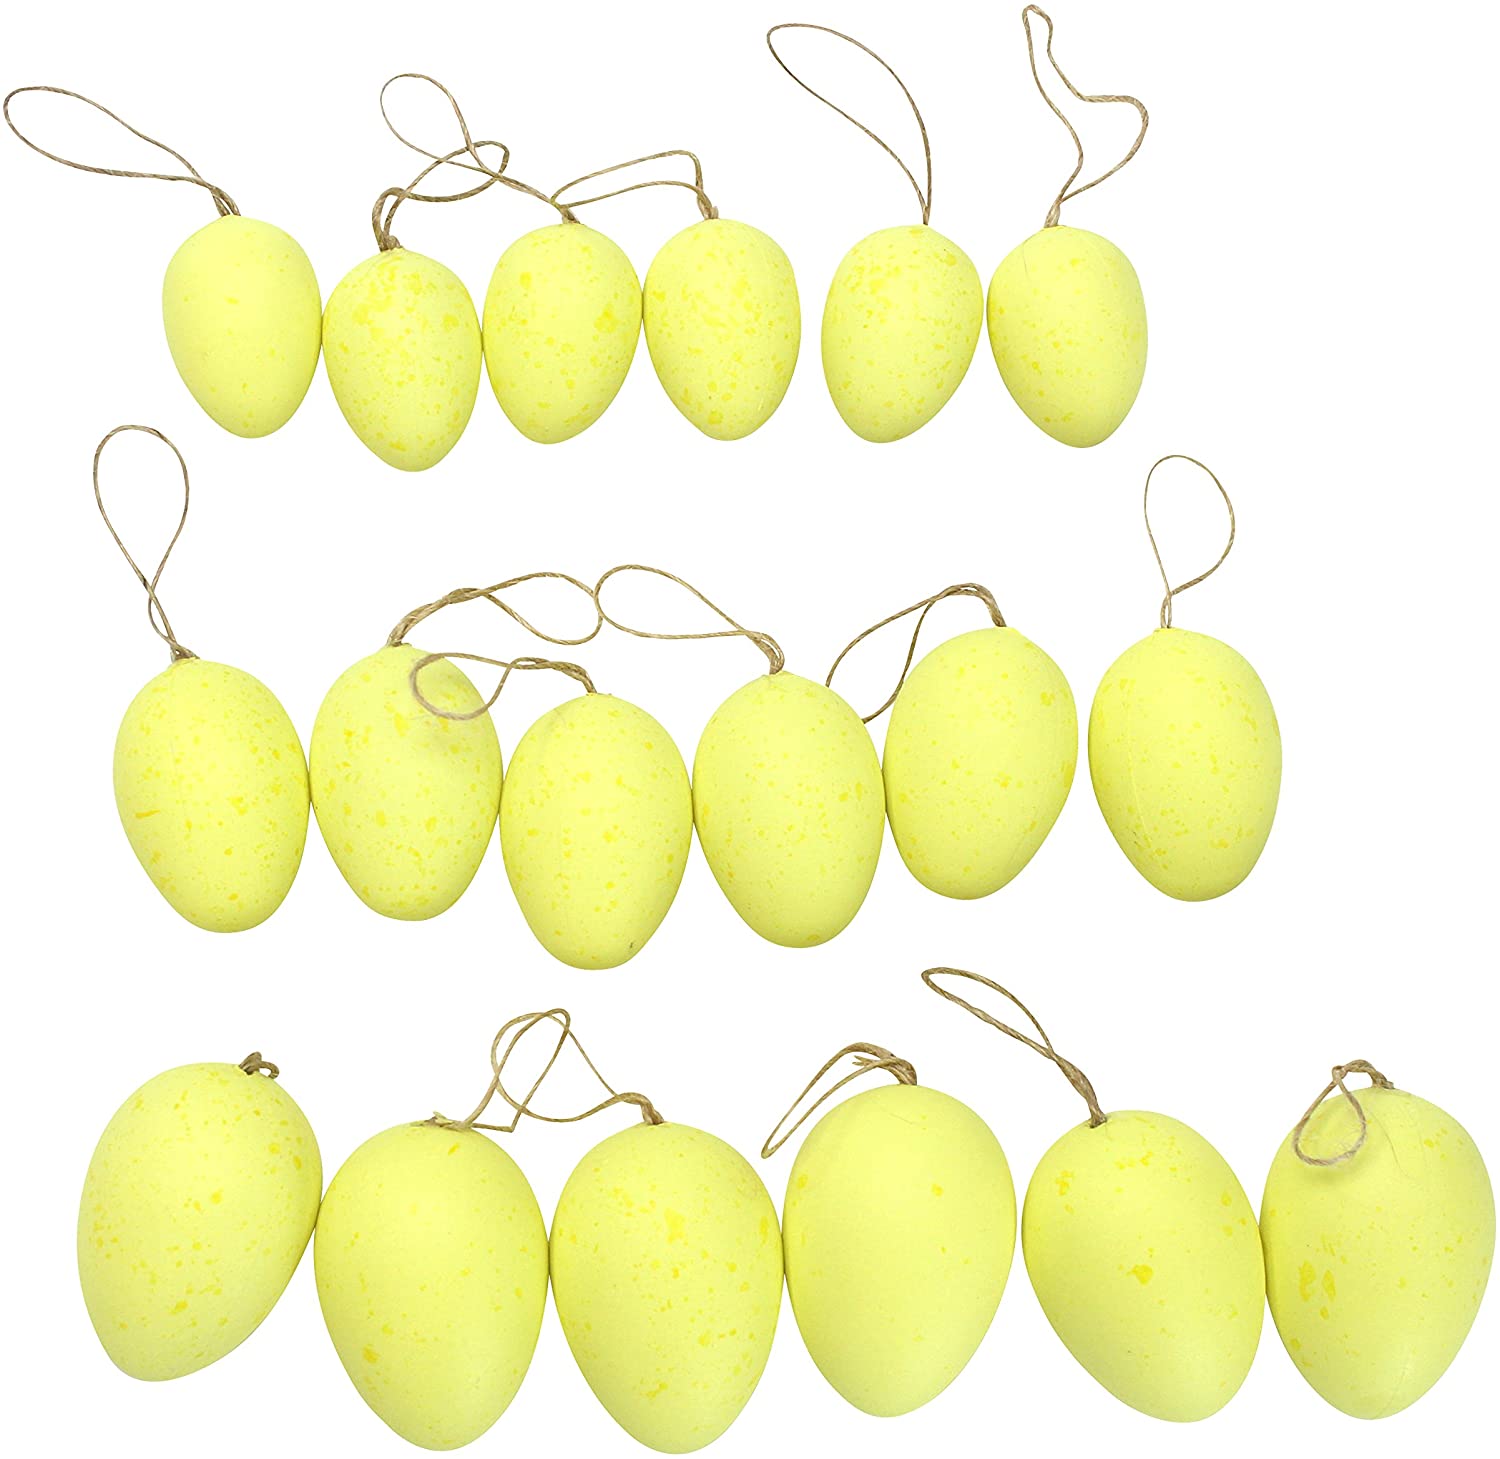 Easter Eggs Bag Of 18 Pieces